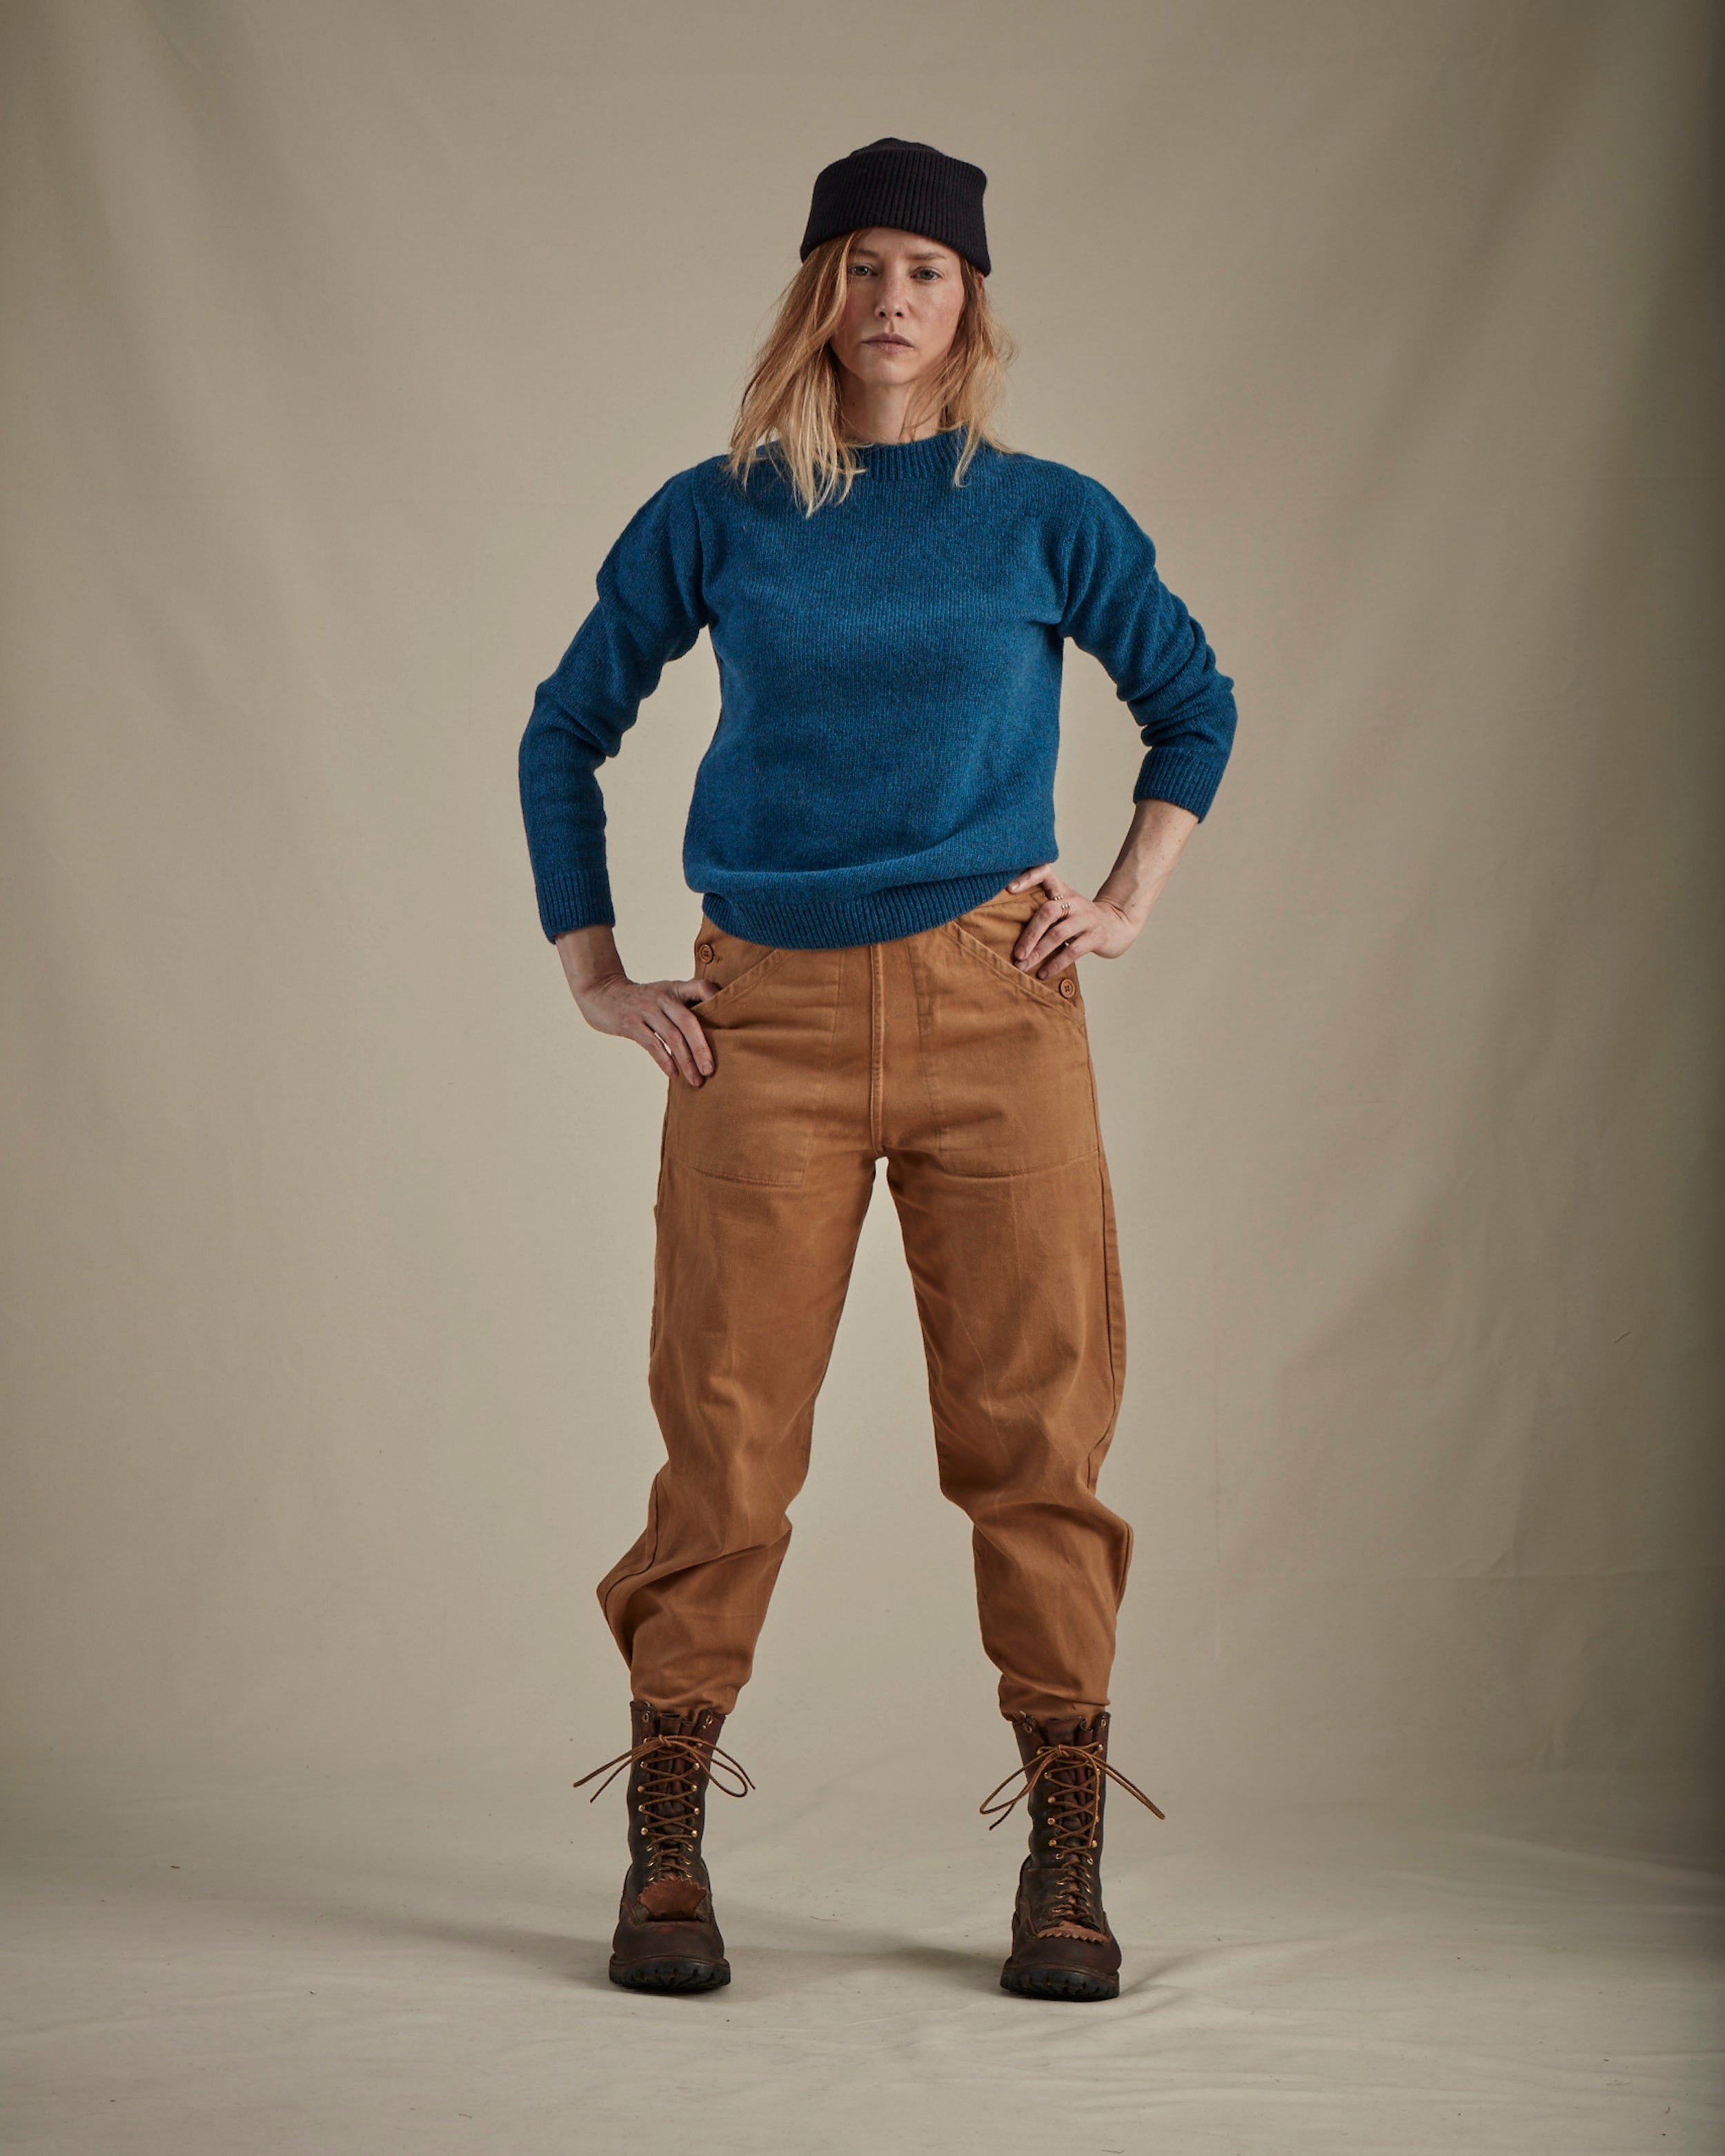 Woman wears Carrier Company Wool Hat in Navy  with Lambswool Jumper and Women's Work Trouser in Tan